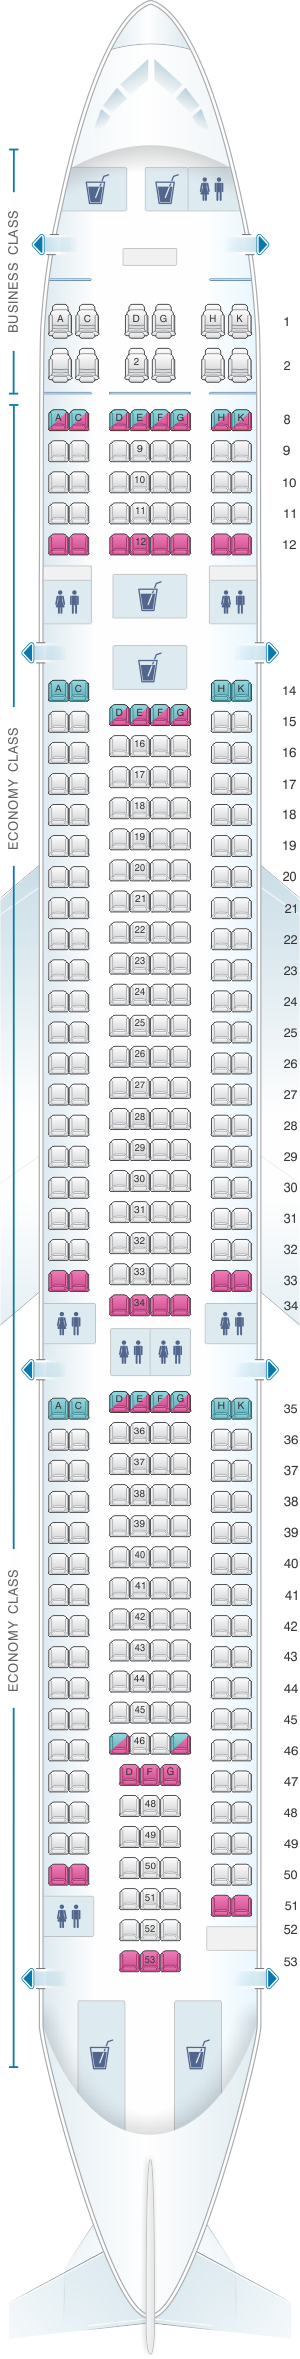 Seat map for Hi Fly Airbus A330 300 347pax